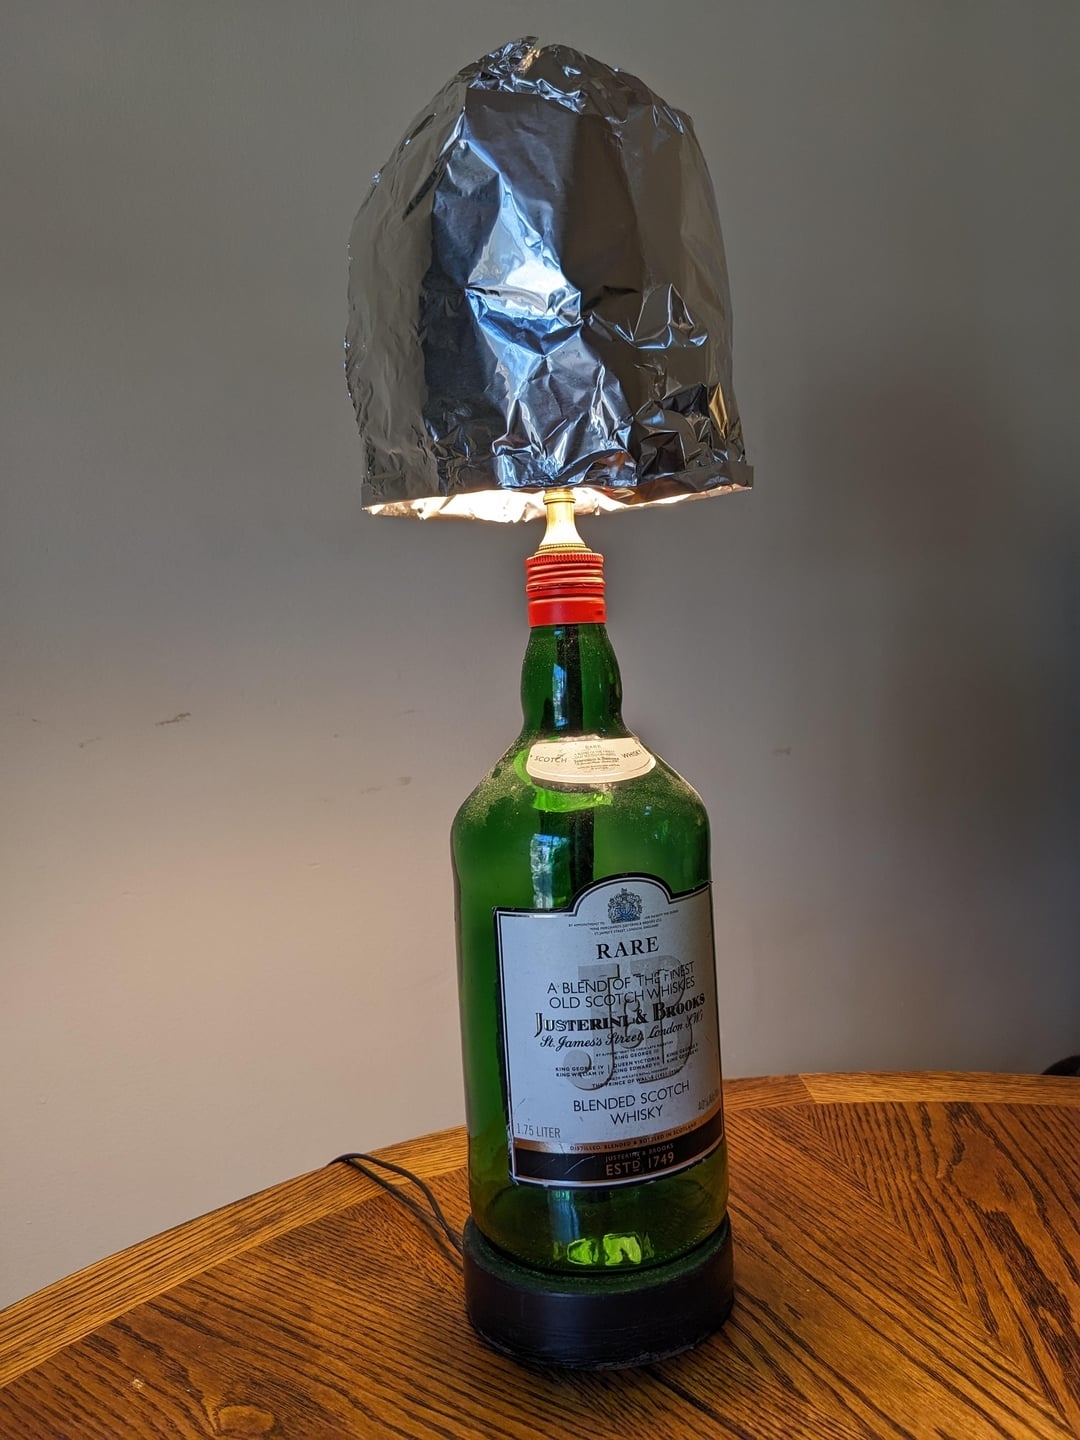 Lamp made from a green glass bottle with a silver foil shade, on a wooden table